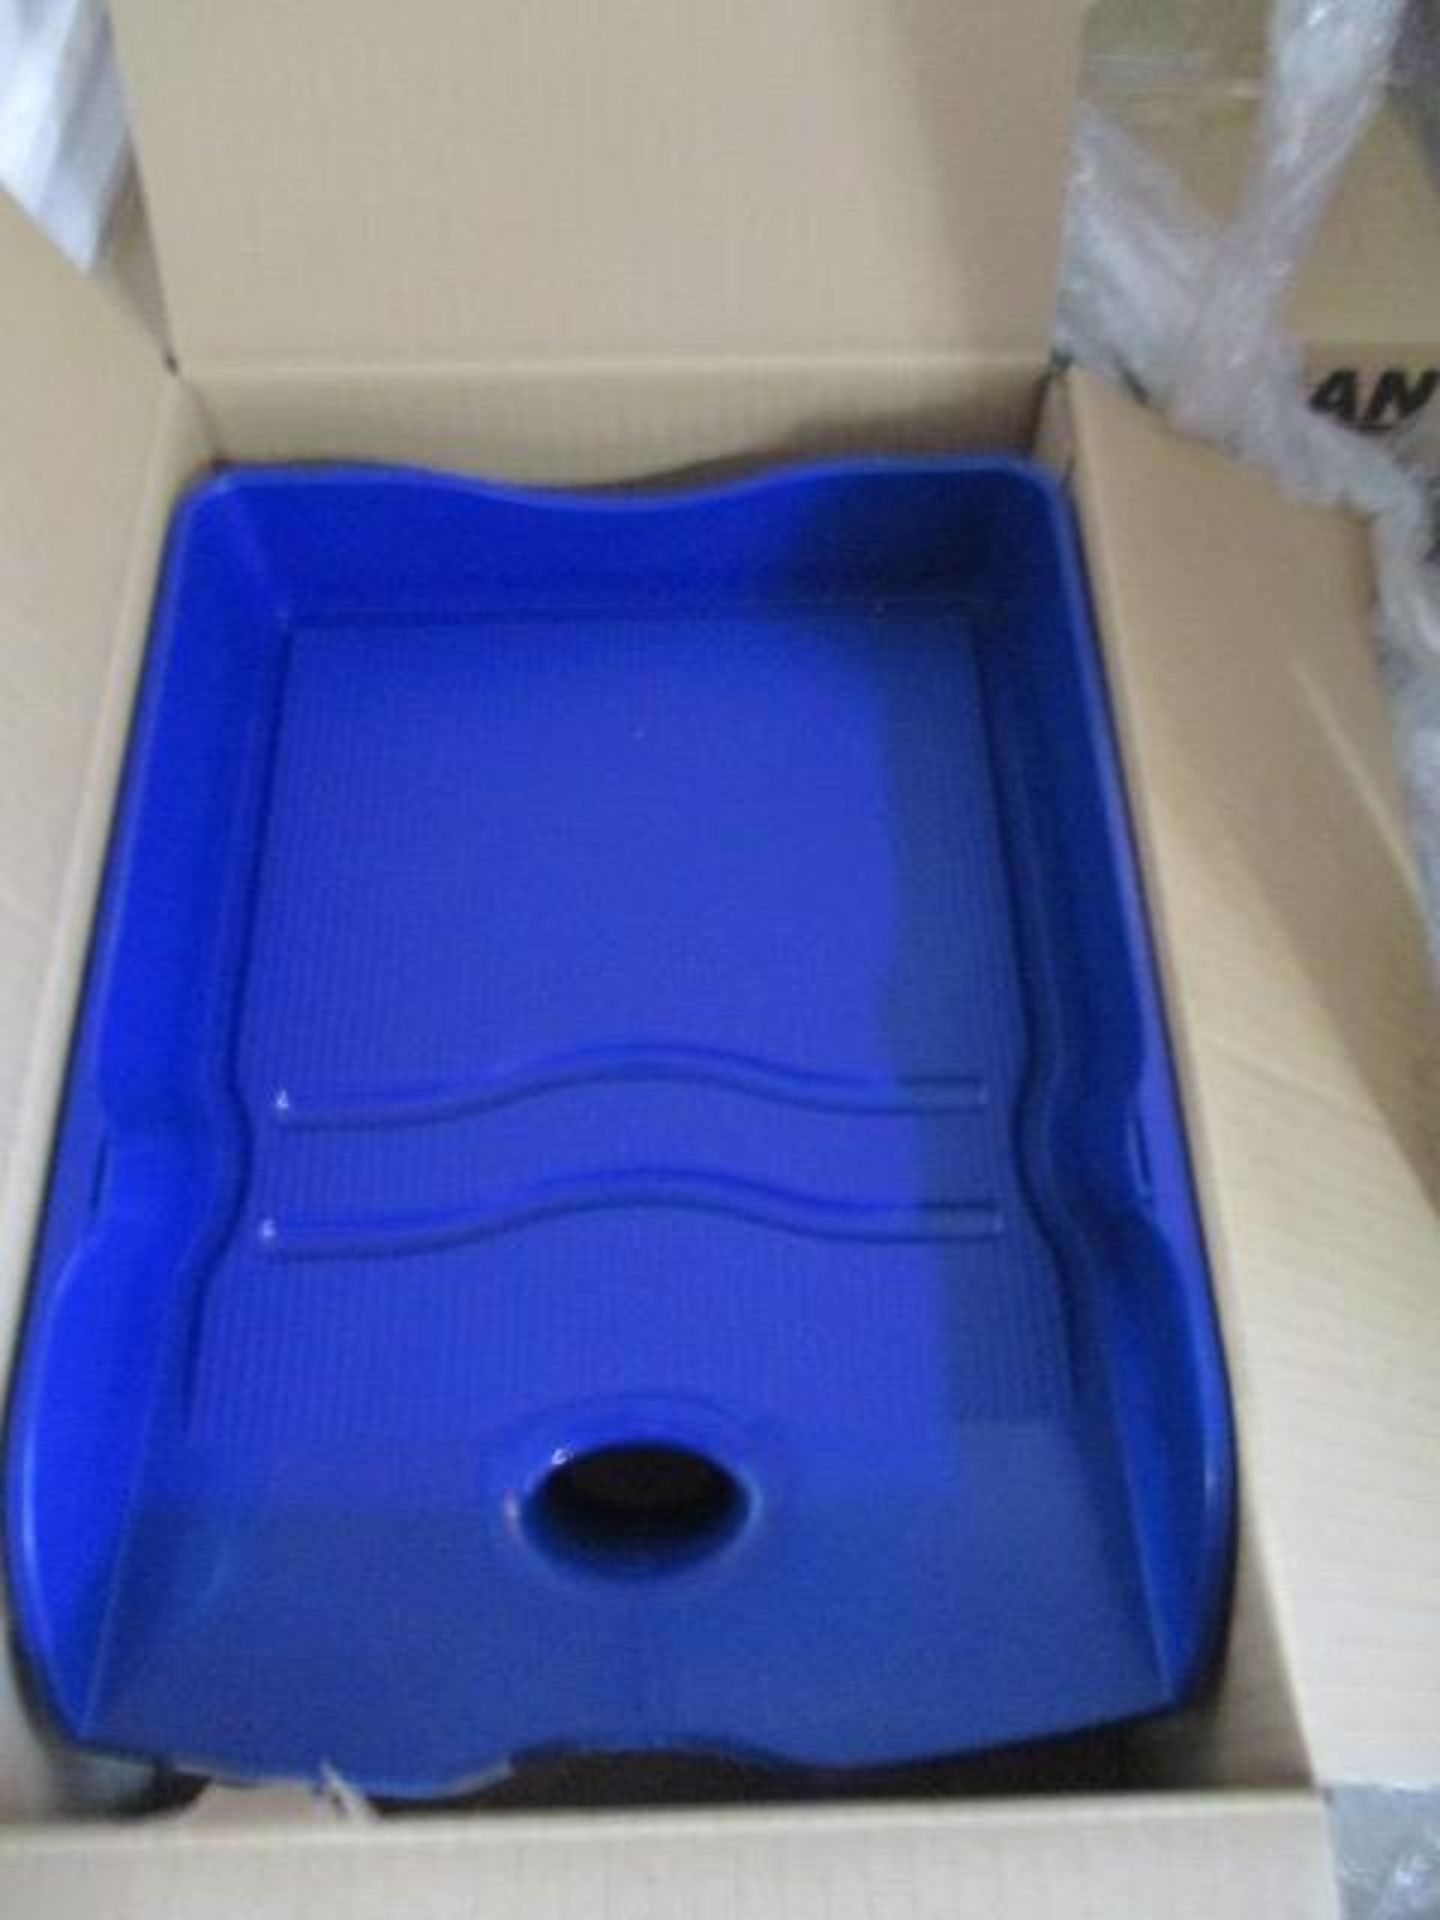 24pcs ( 4 cartons of 6 ) Blue Han stacking multi point desk trays Factory sealed brand new - Image 2 of 2